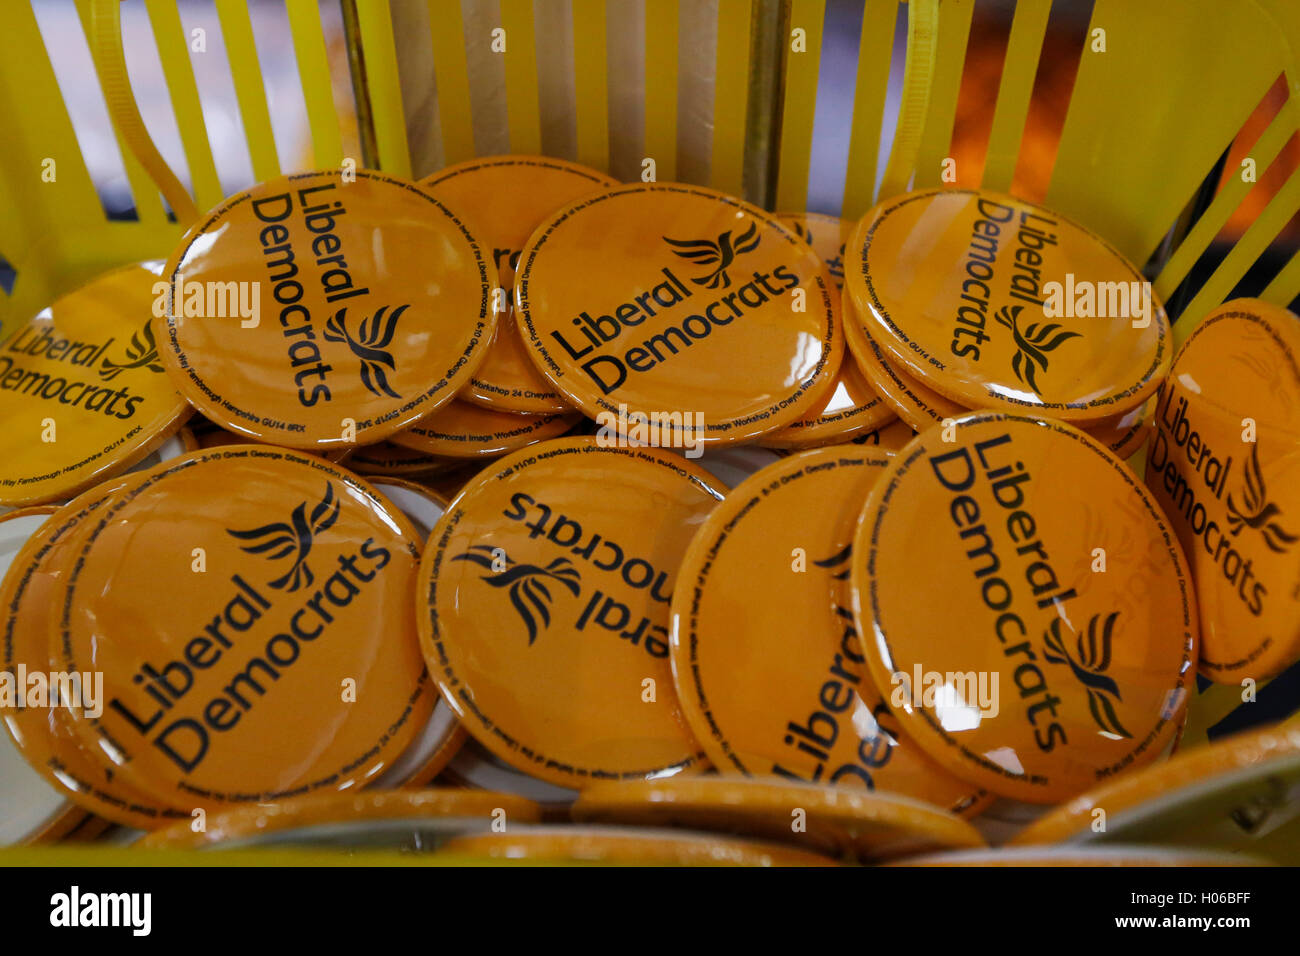 Brighton, UK 20th Sep, 2016 Liberal Democrat badges are on sale at  the Liberal Democrats Autumn Conference at Brighton, UK, Tuesday September 20, 2016. Credit:  Luke MacGregor/Alamy Live News Stock Photo